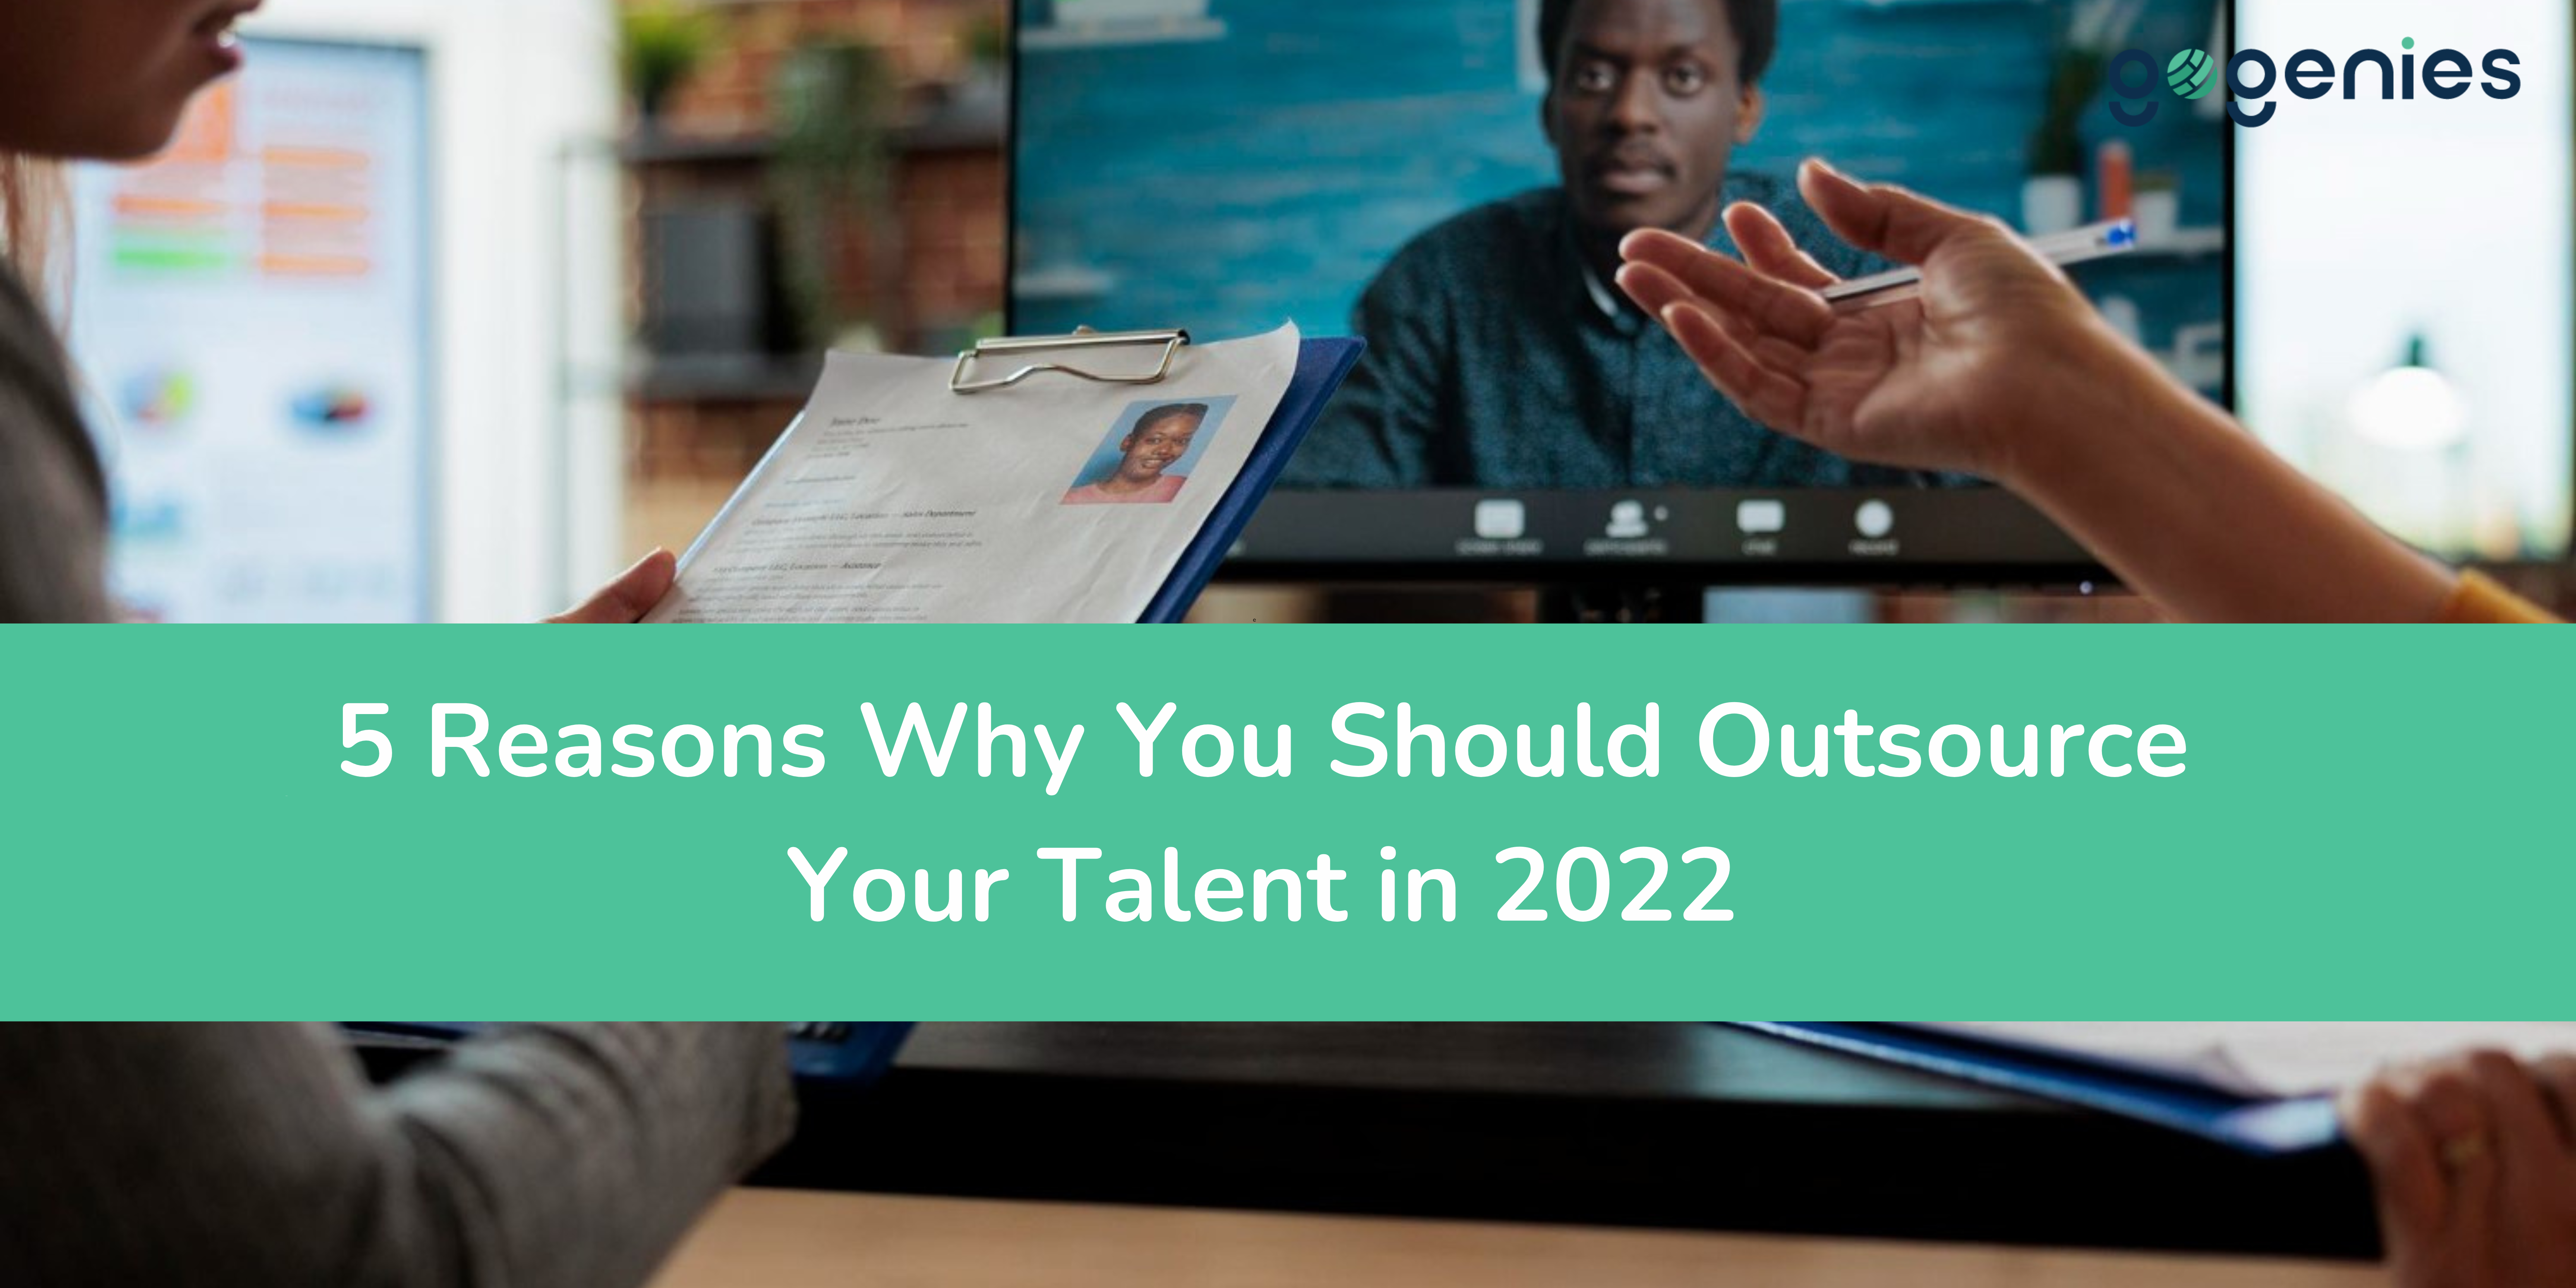 5 Reasons Why You Should Outsource Your Talent in 2022